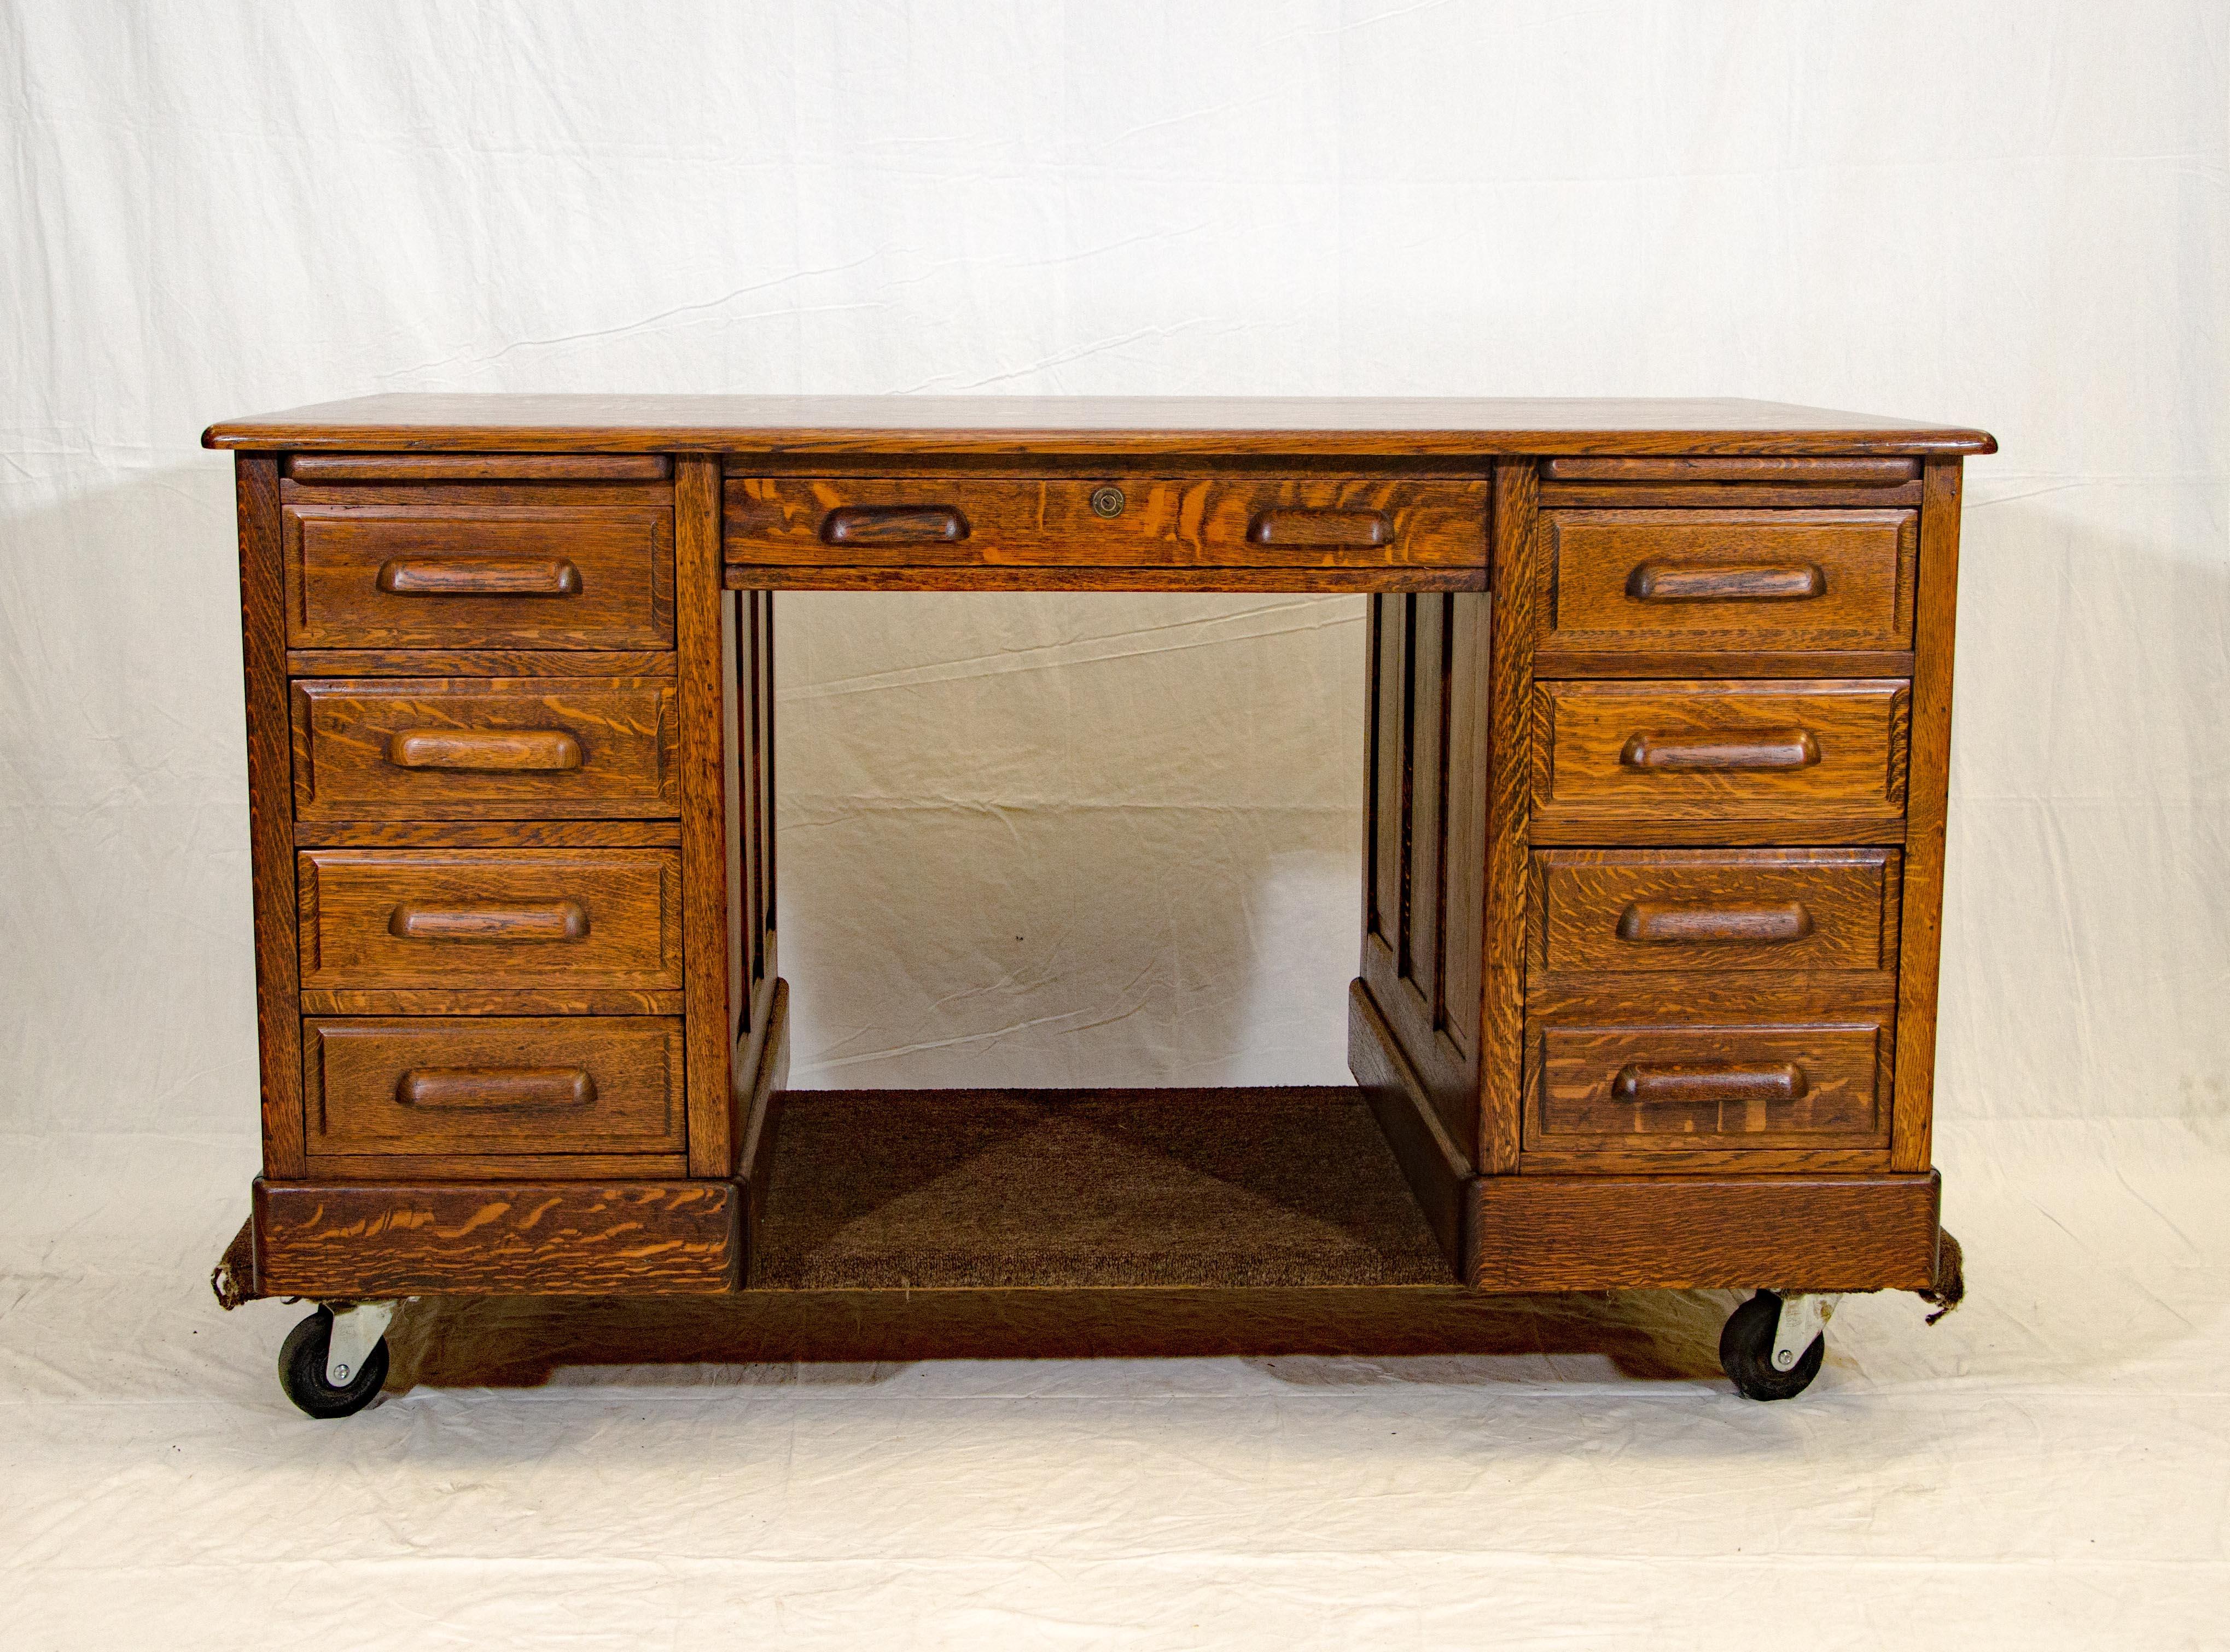 A very nice antique oak desk from the turn of the century, the oak is quarter-sawn and exhibits beautiful grain patterns. The four left-hand drawers have an interior height of 4